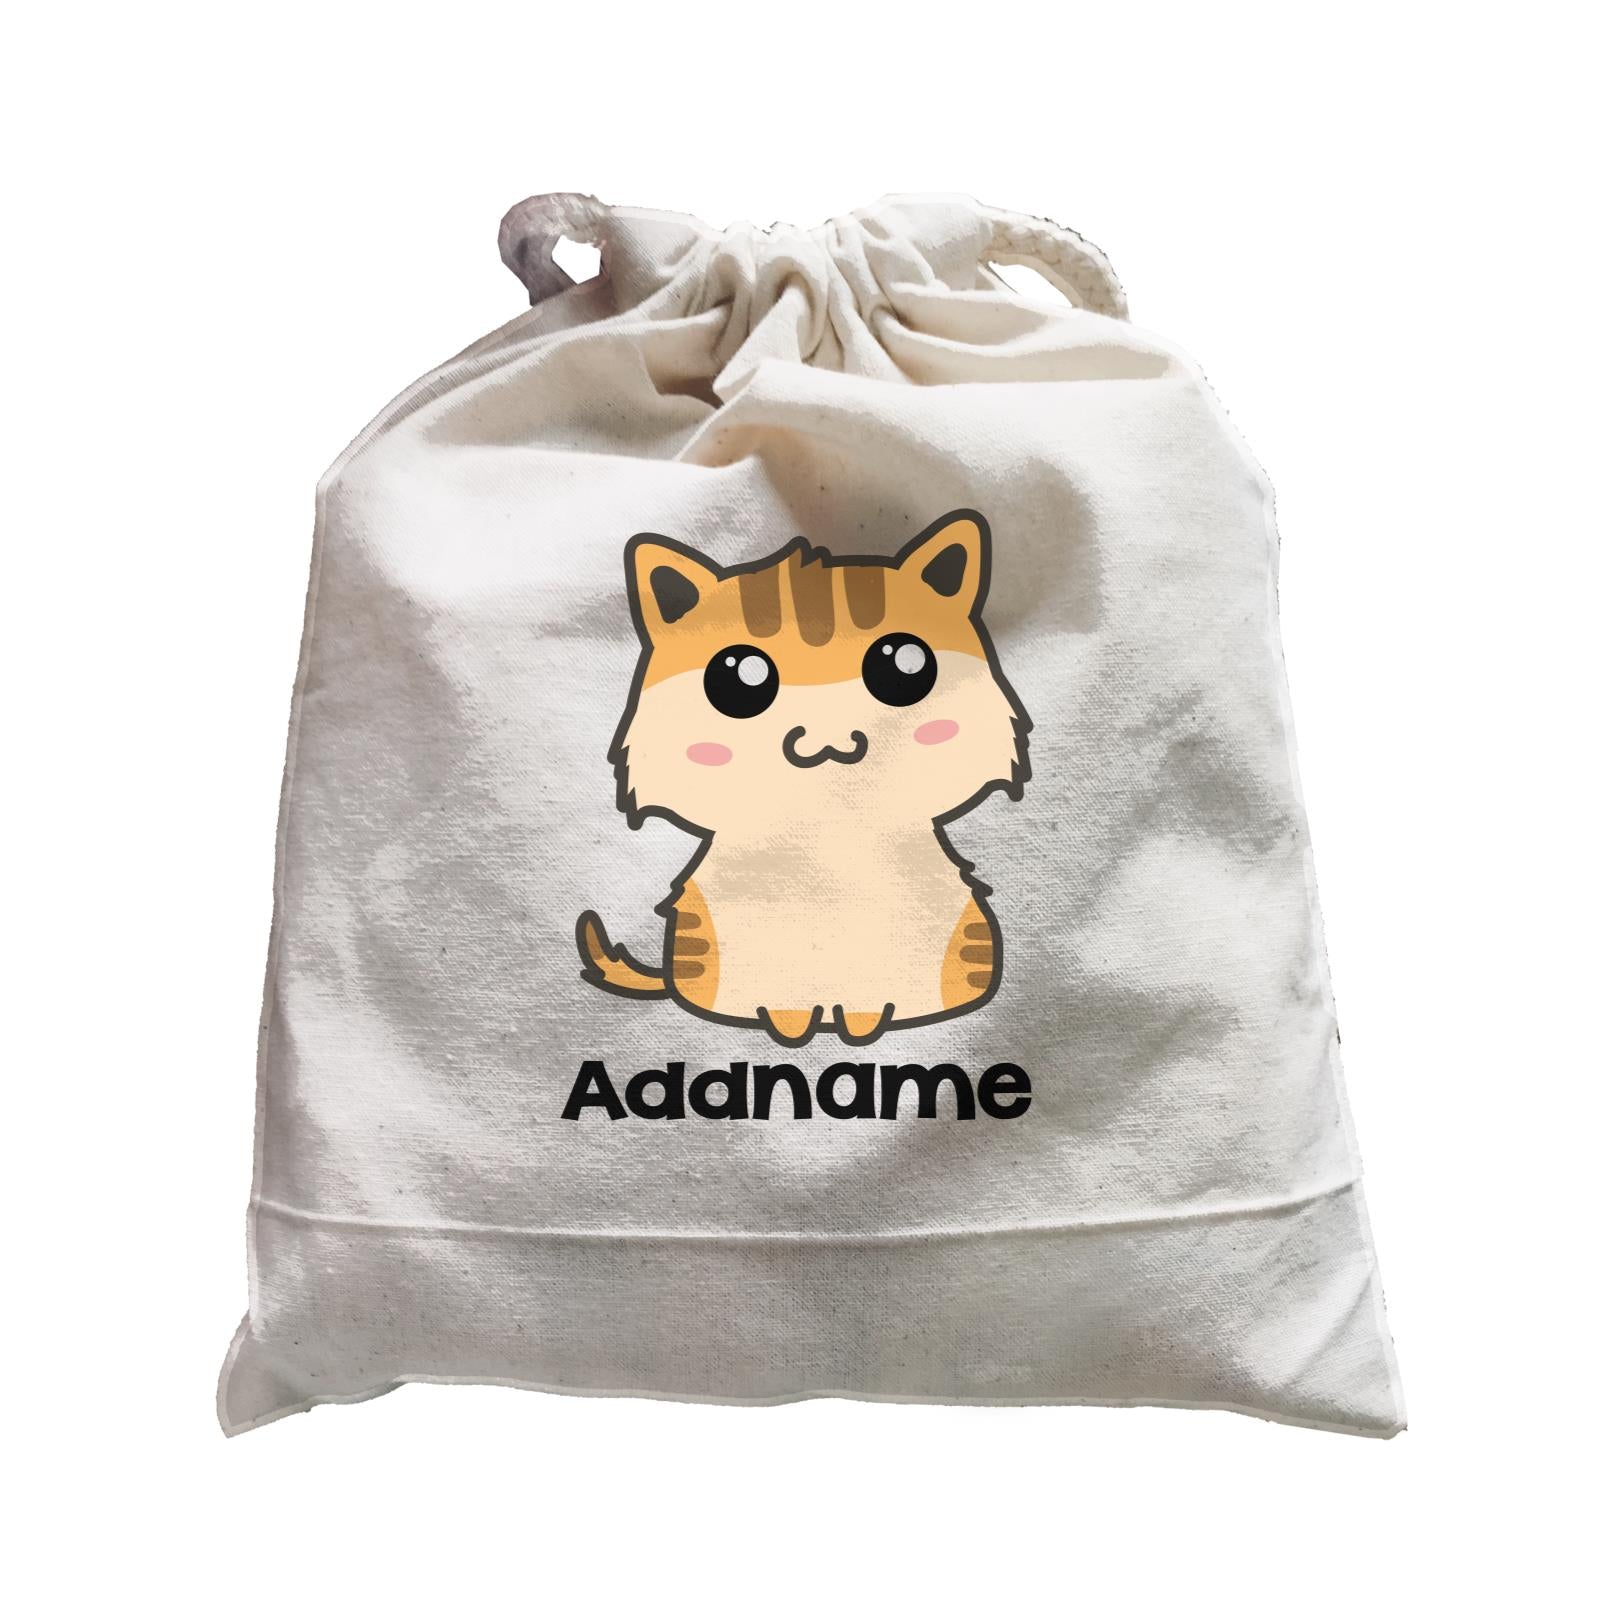 Drawn Adorable Cats Cream & Yellow Addname Satchel